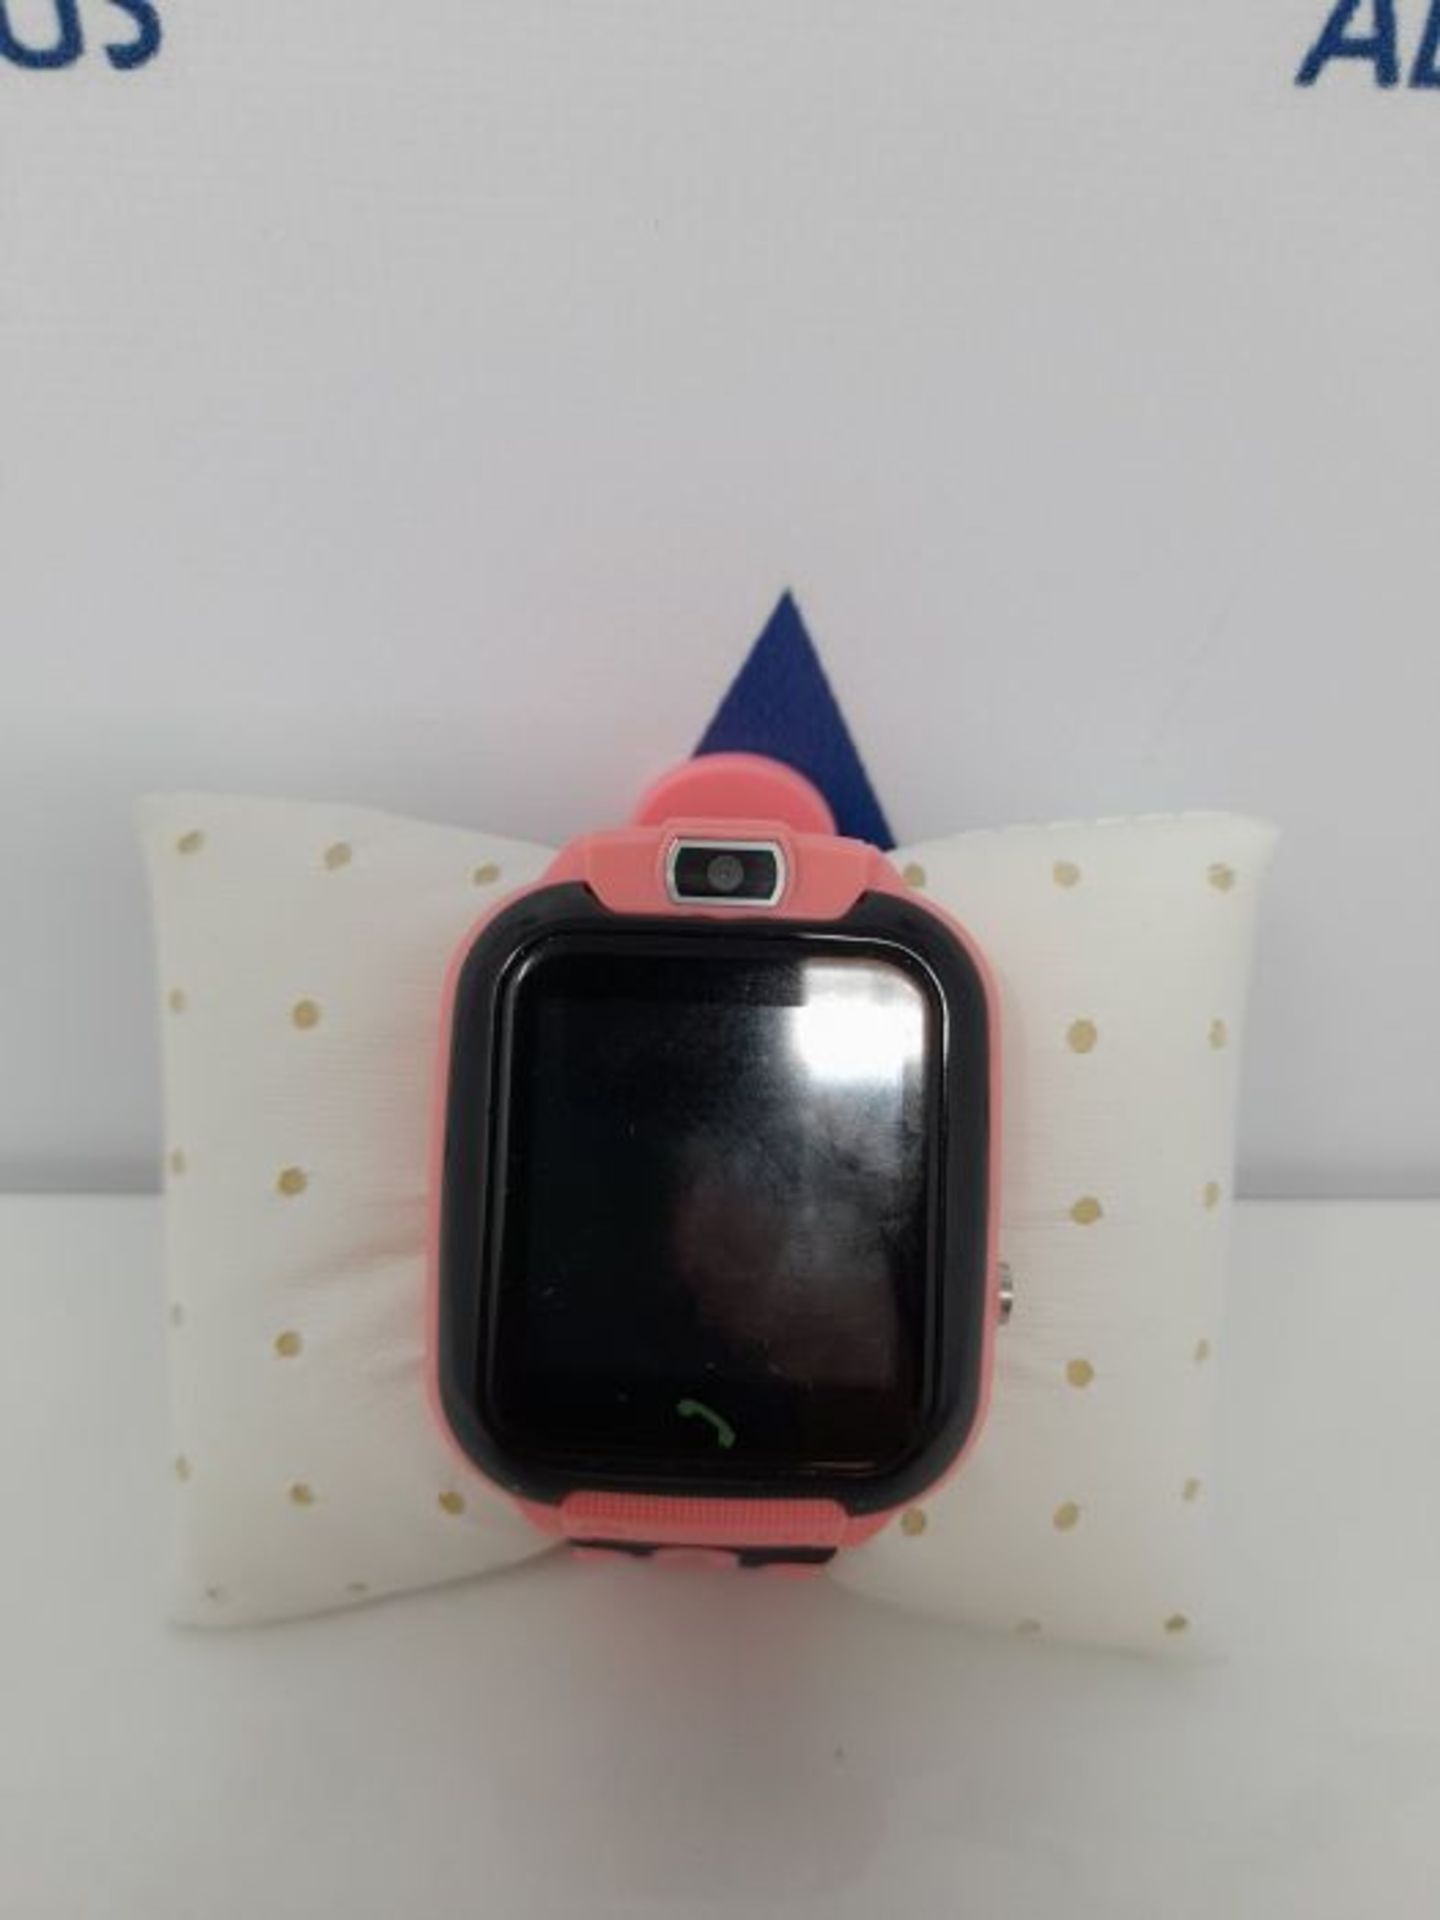 bhdlovely Kids Smart Watches for Girls Boys,Tracker Waterproof Smart watch for kids wi - Image 3 of 3